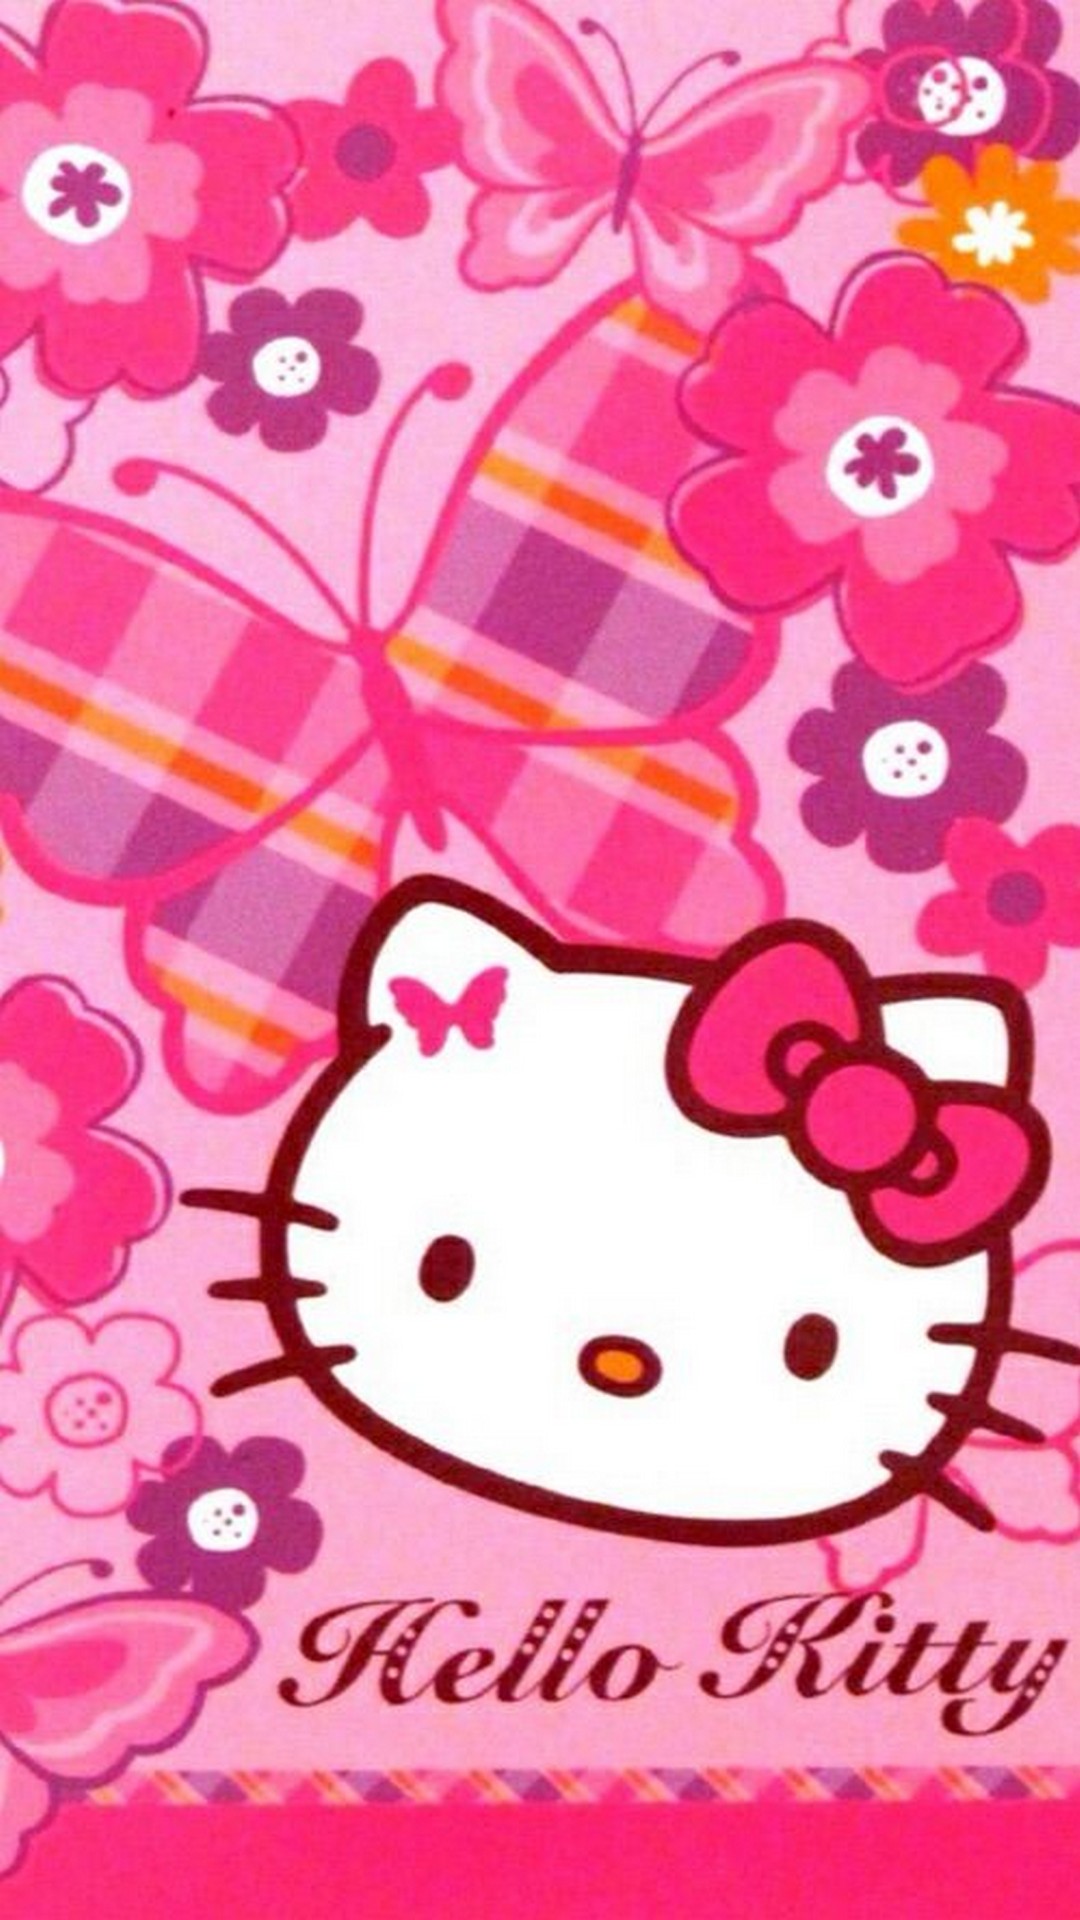 Sanrio Hello Kitty iPhone 7 Plus Wallpaper with image resolution 1080x1920 pixel. You can use this wallpaper as background for your desktop Computer Screensavers, Android or iPhone smartphones